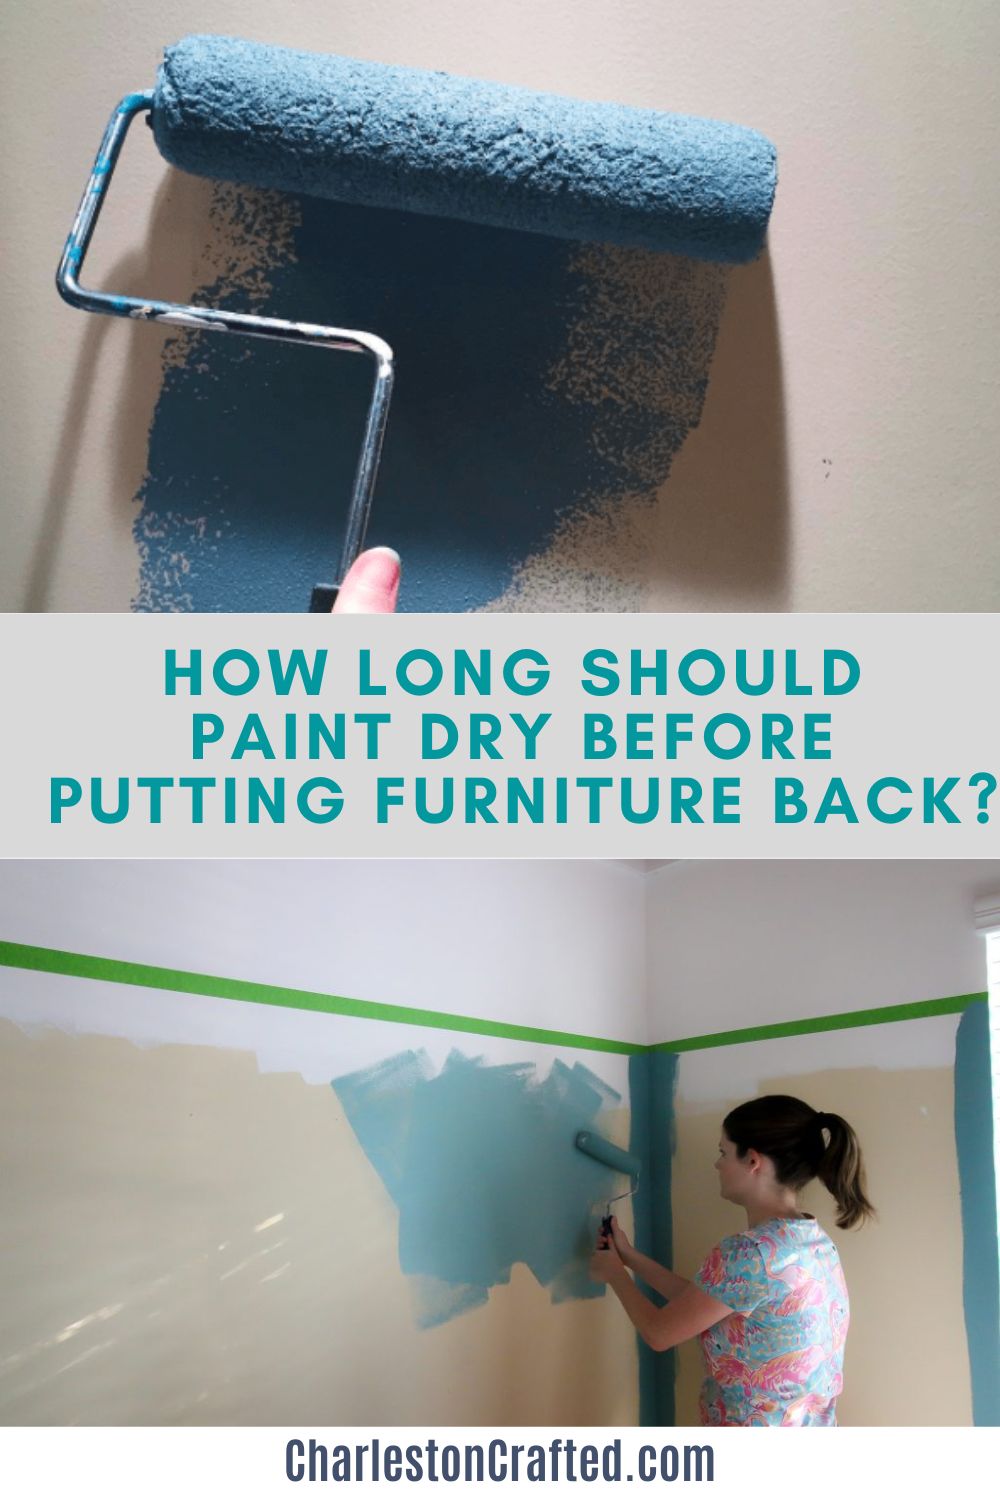 How long should paint dry before putting furniture back